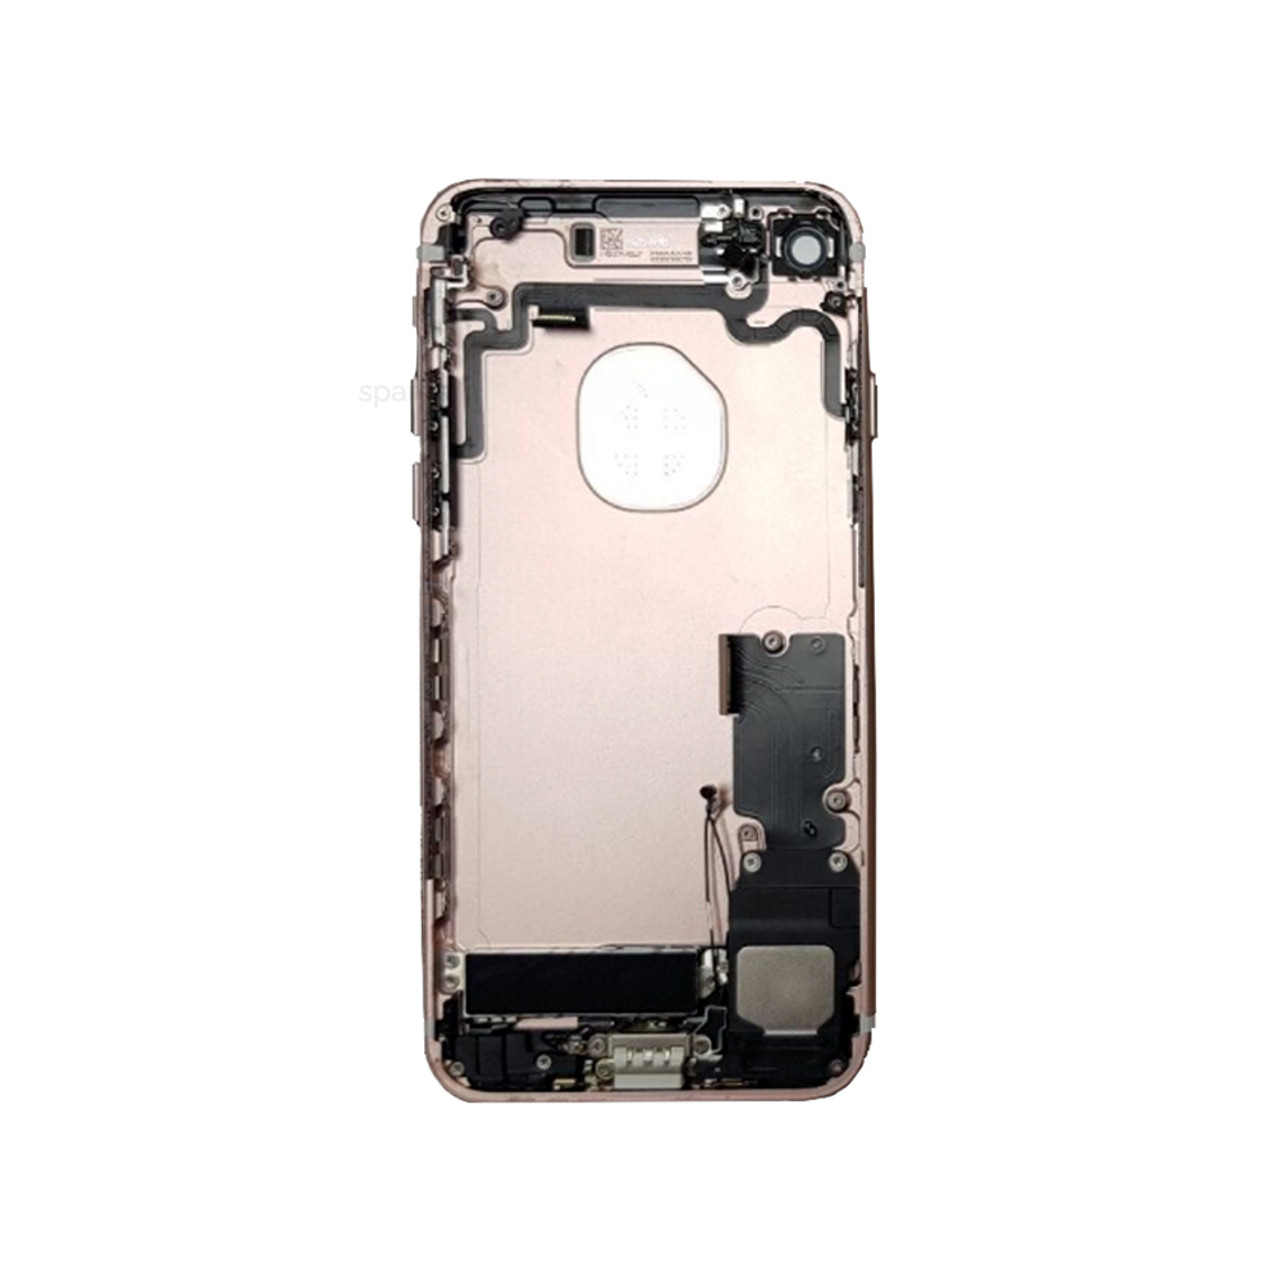 iPhone 7 Plus Housing Chassis With Parts Rose Gold Replacement